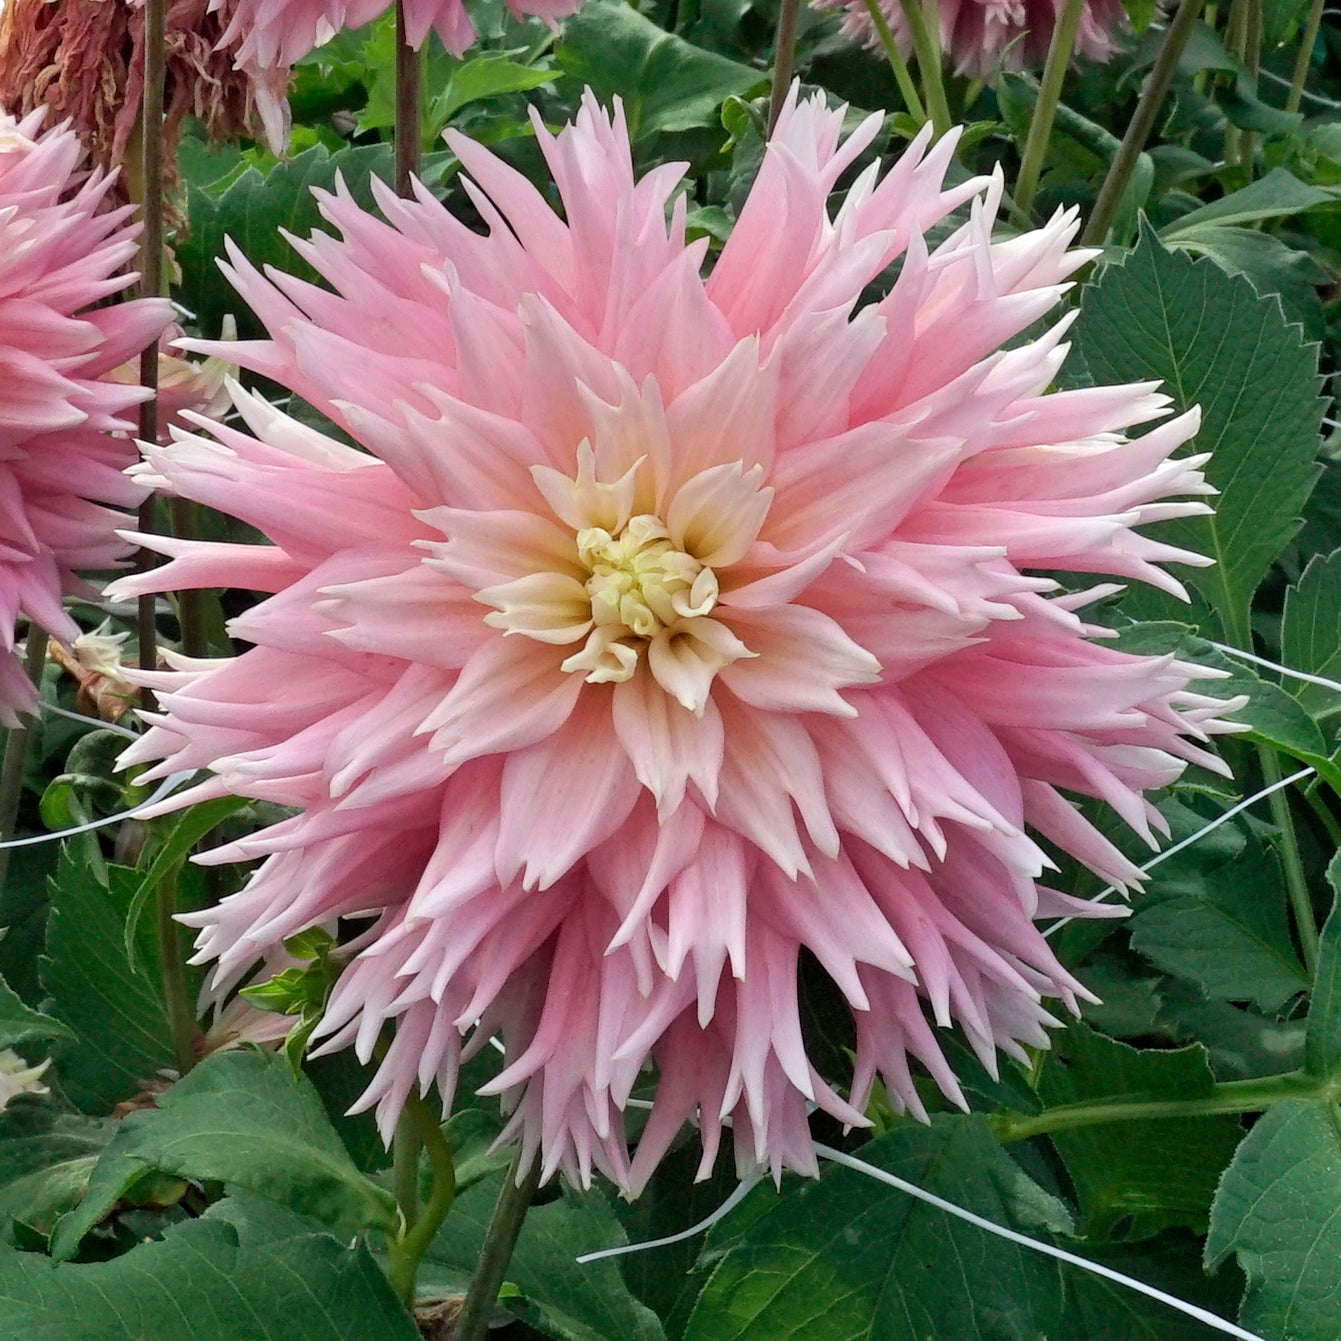 Dahlia Just Married